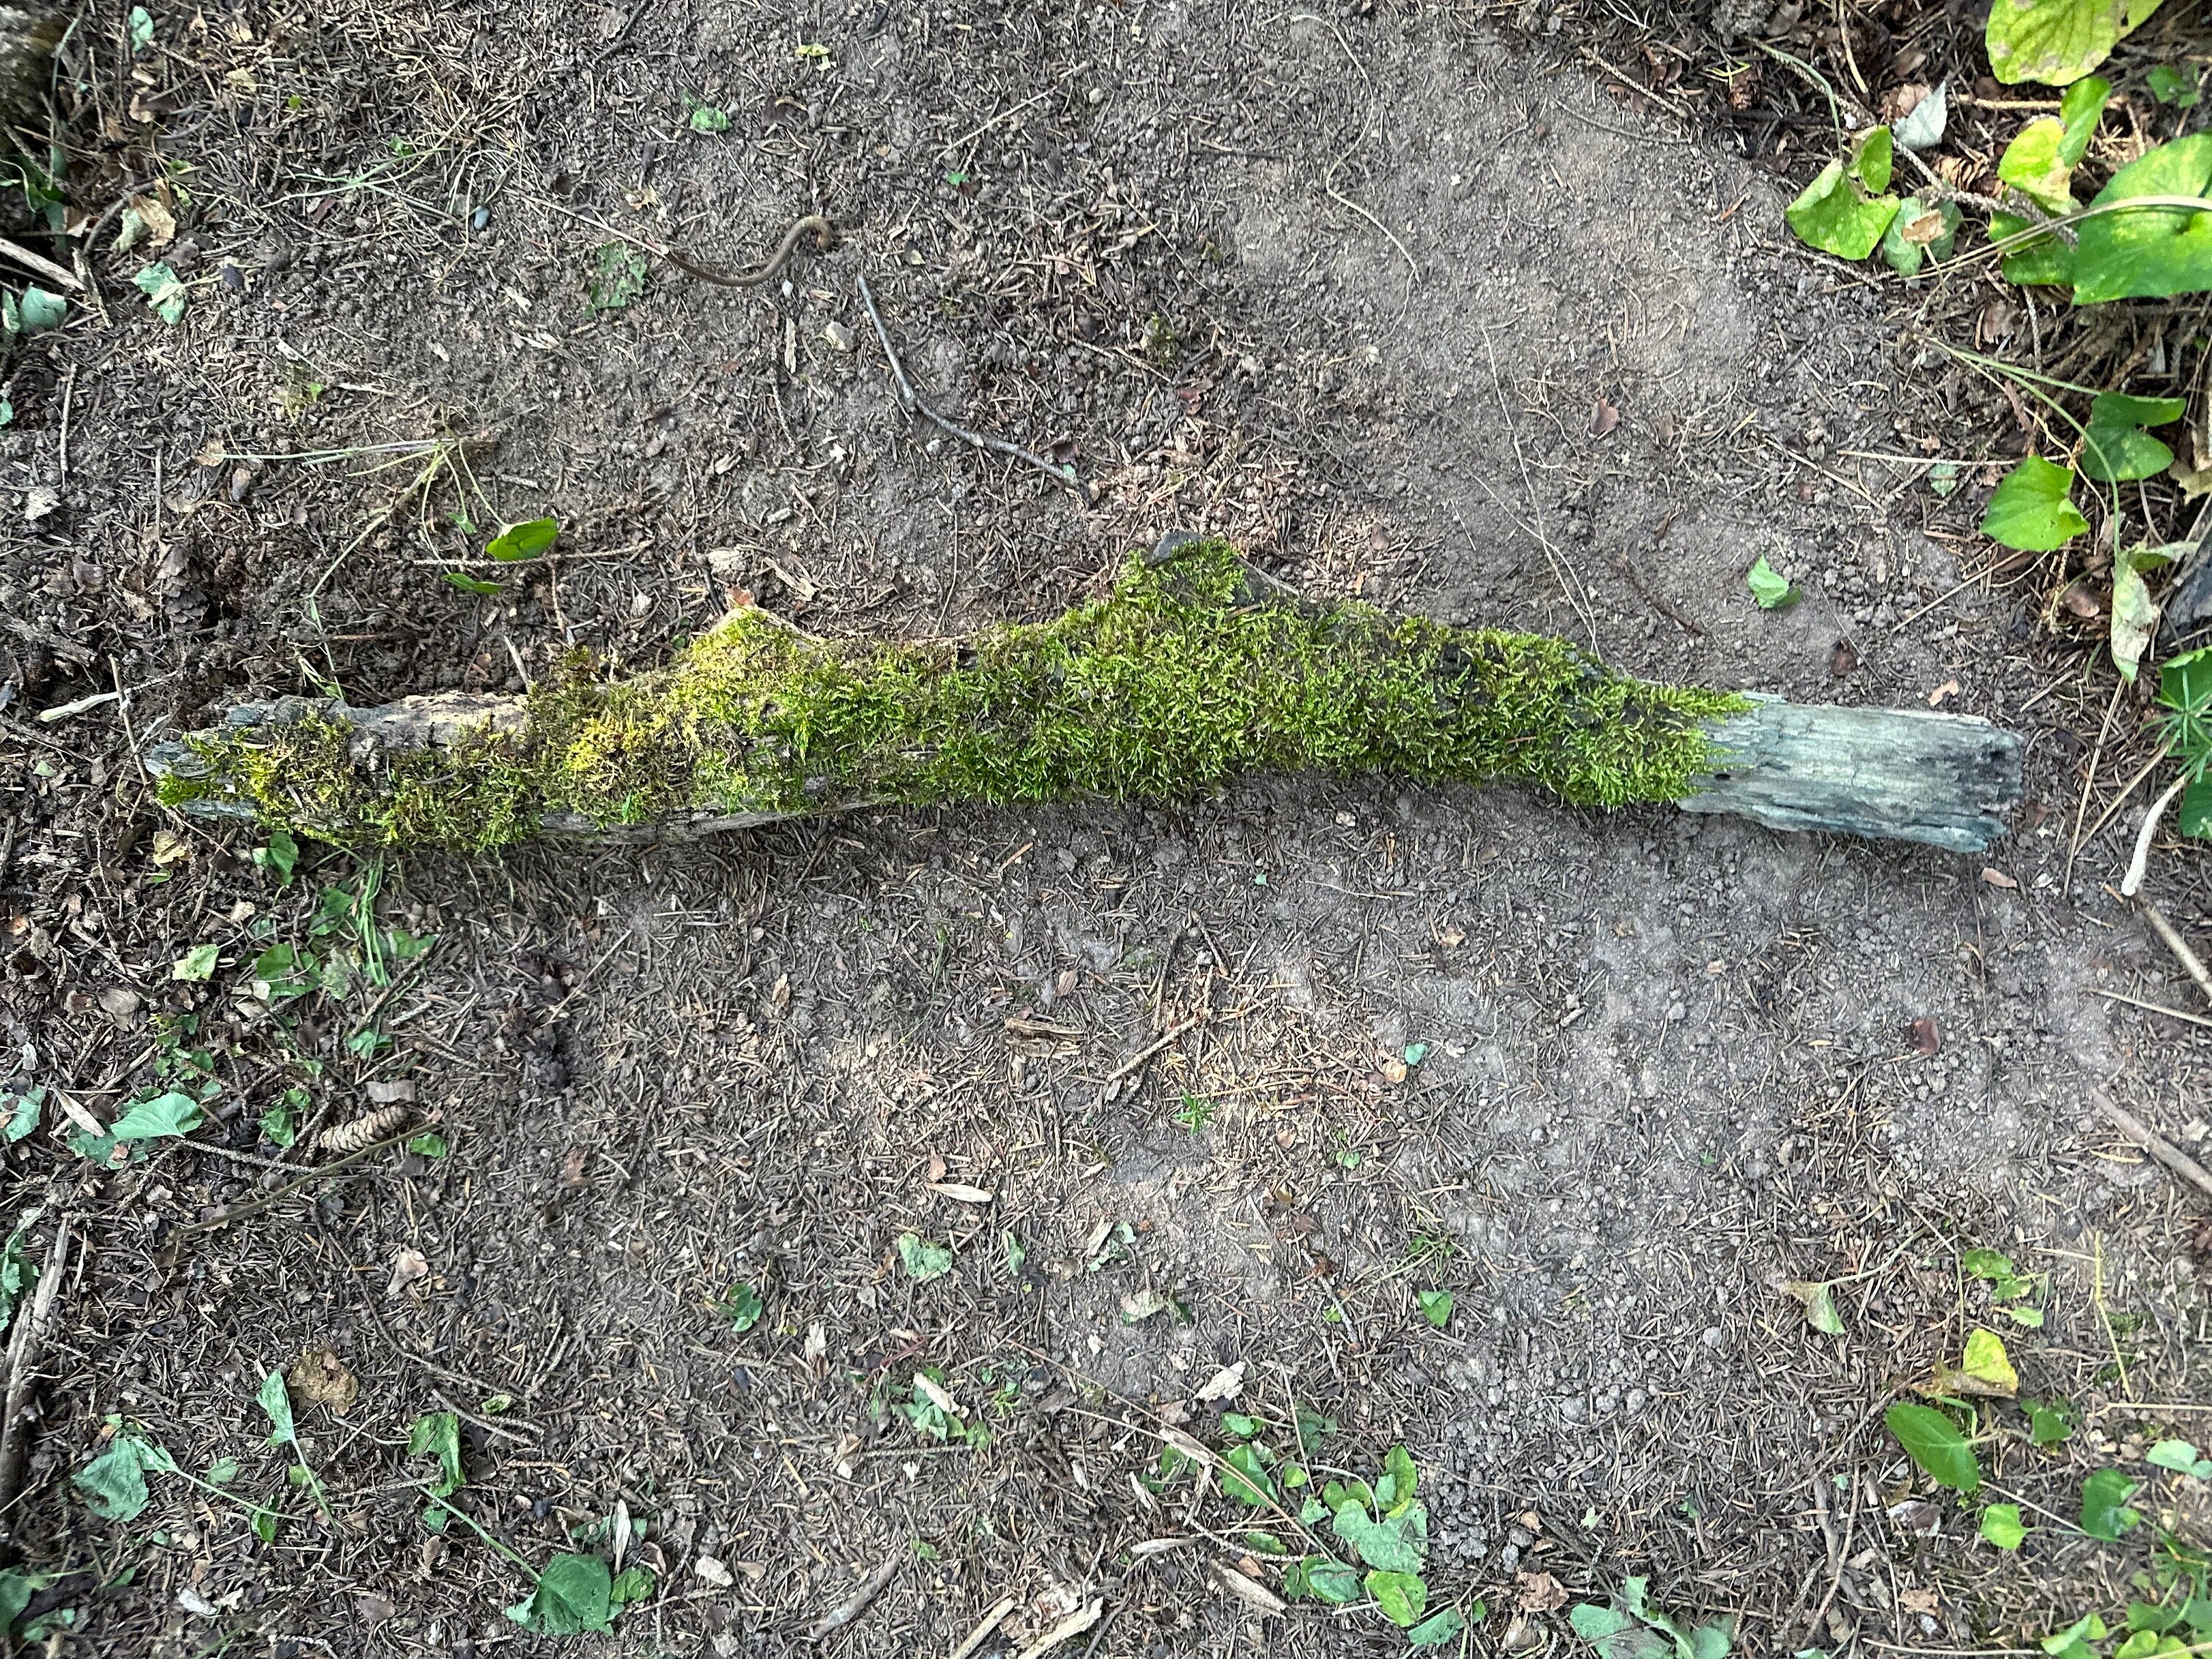 Mossy Log, Real Moss on Log, 27 Inches Long by 3 Inches Wide and 2 Inches High